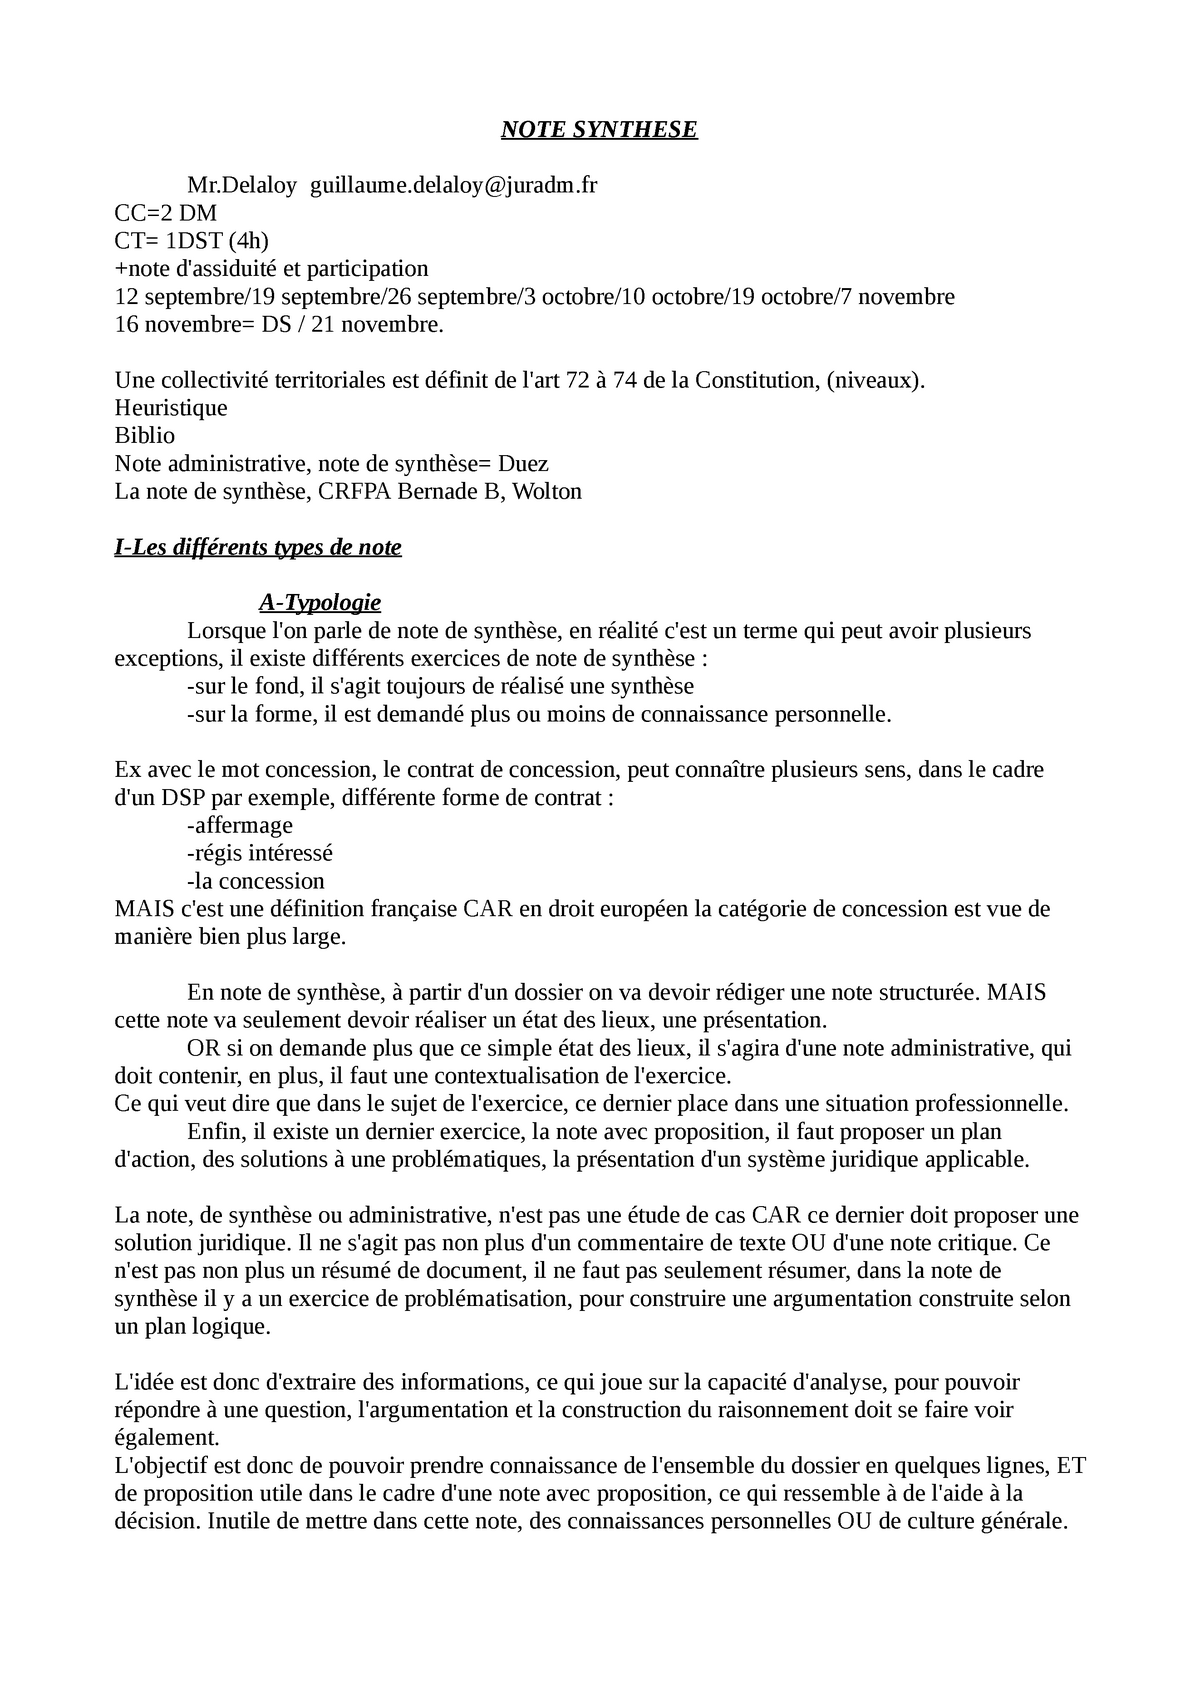 Note De Synthese Cours 2019 2020 Note Synthese Mr Guillaume Juradm Cc 2 Dm Ct 1dst 4h Note Studocu